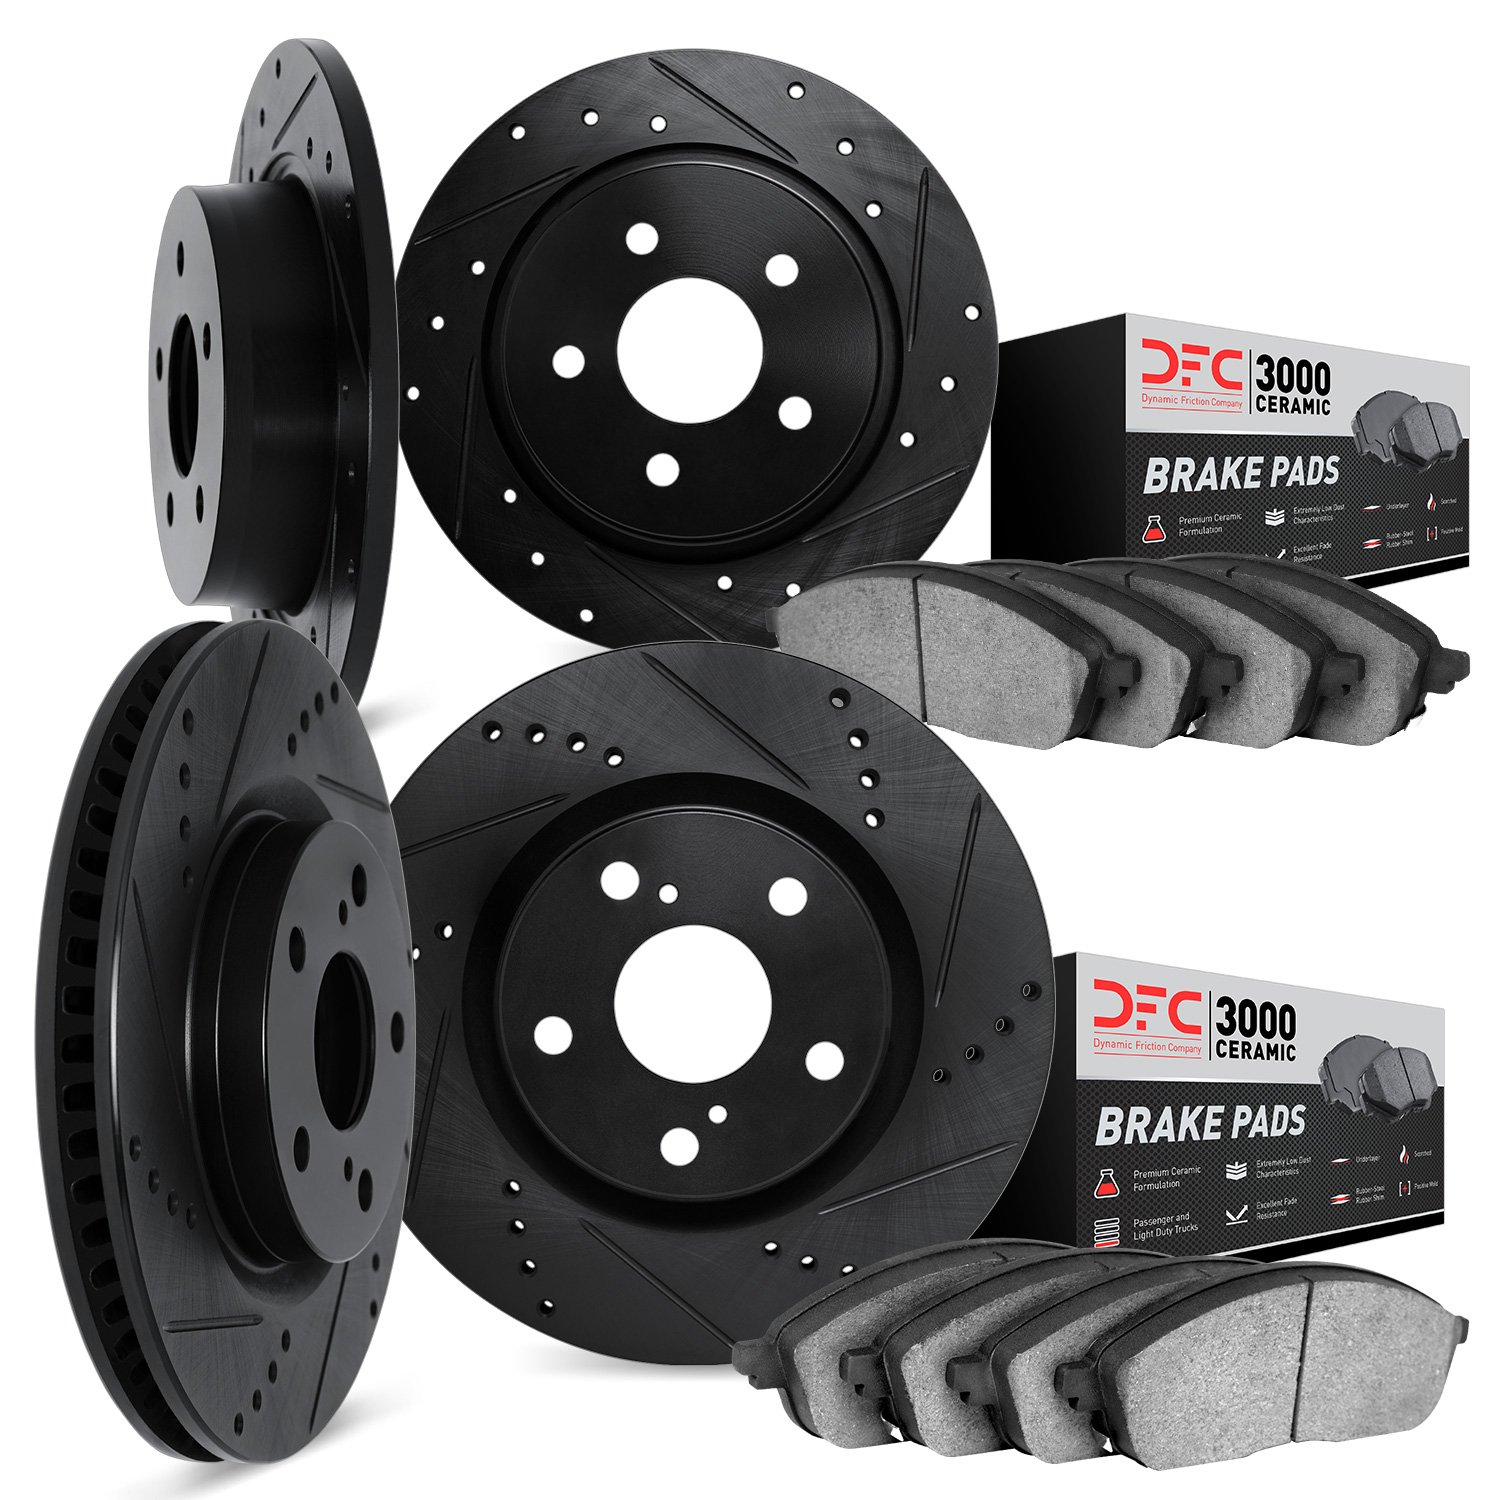 8304-59089 Drilled/Slotted Brake Rotors with 3000-Series Ceramic Brake Pads Kit [Black], Fits Select Acura/Honda, Position: Fron